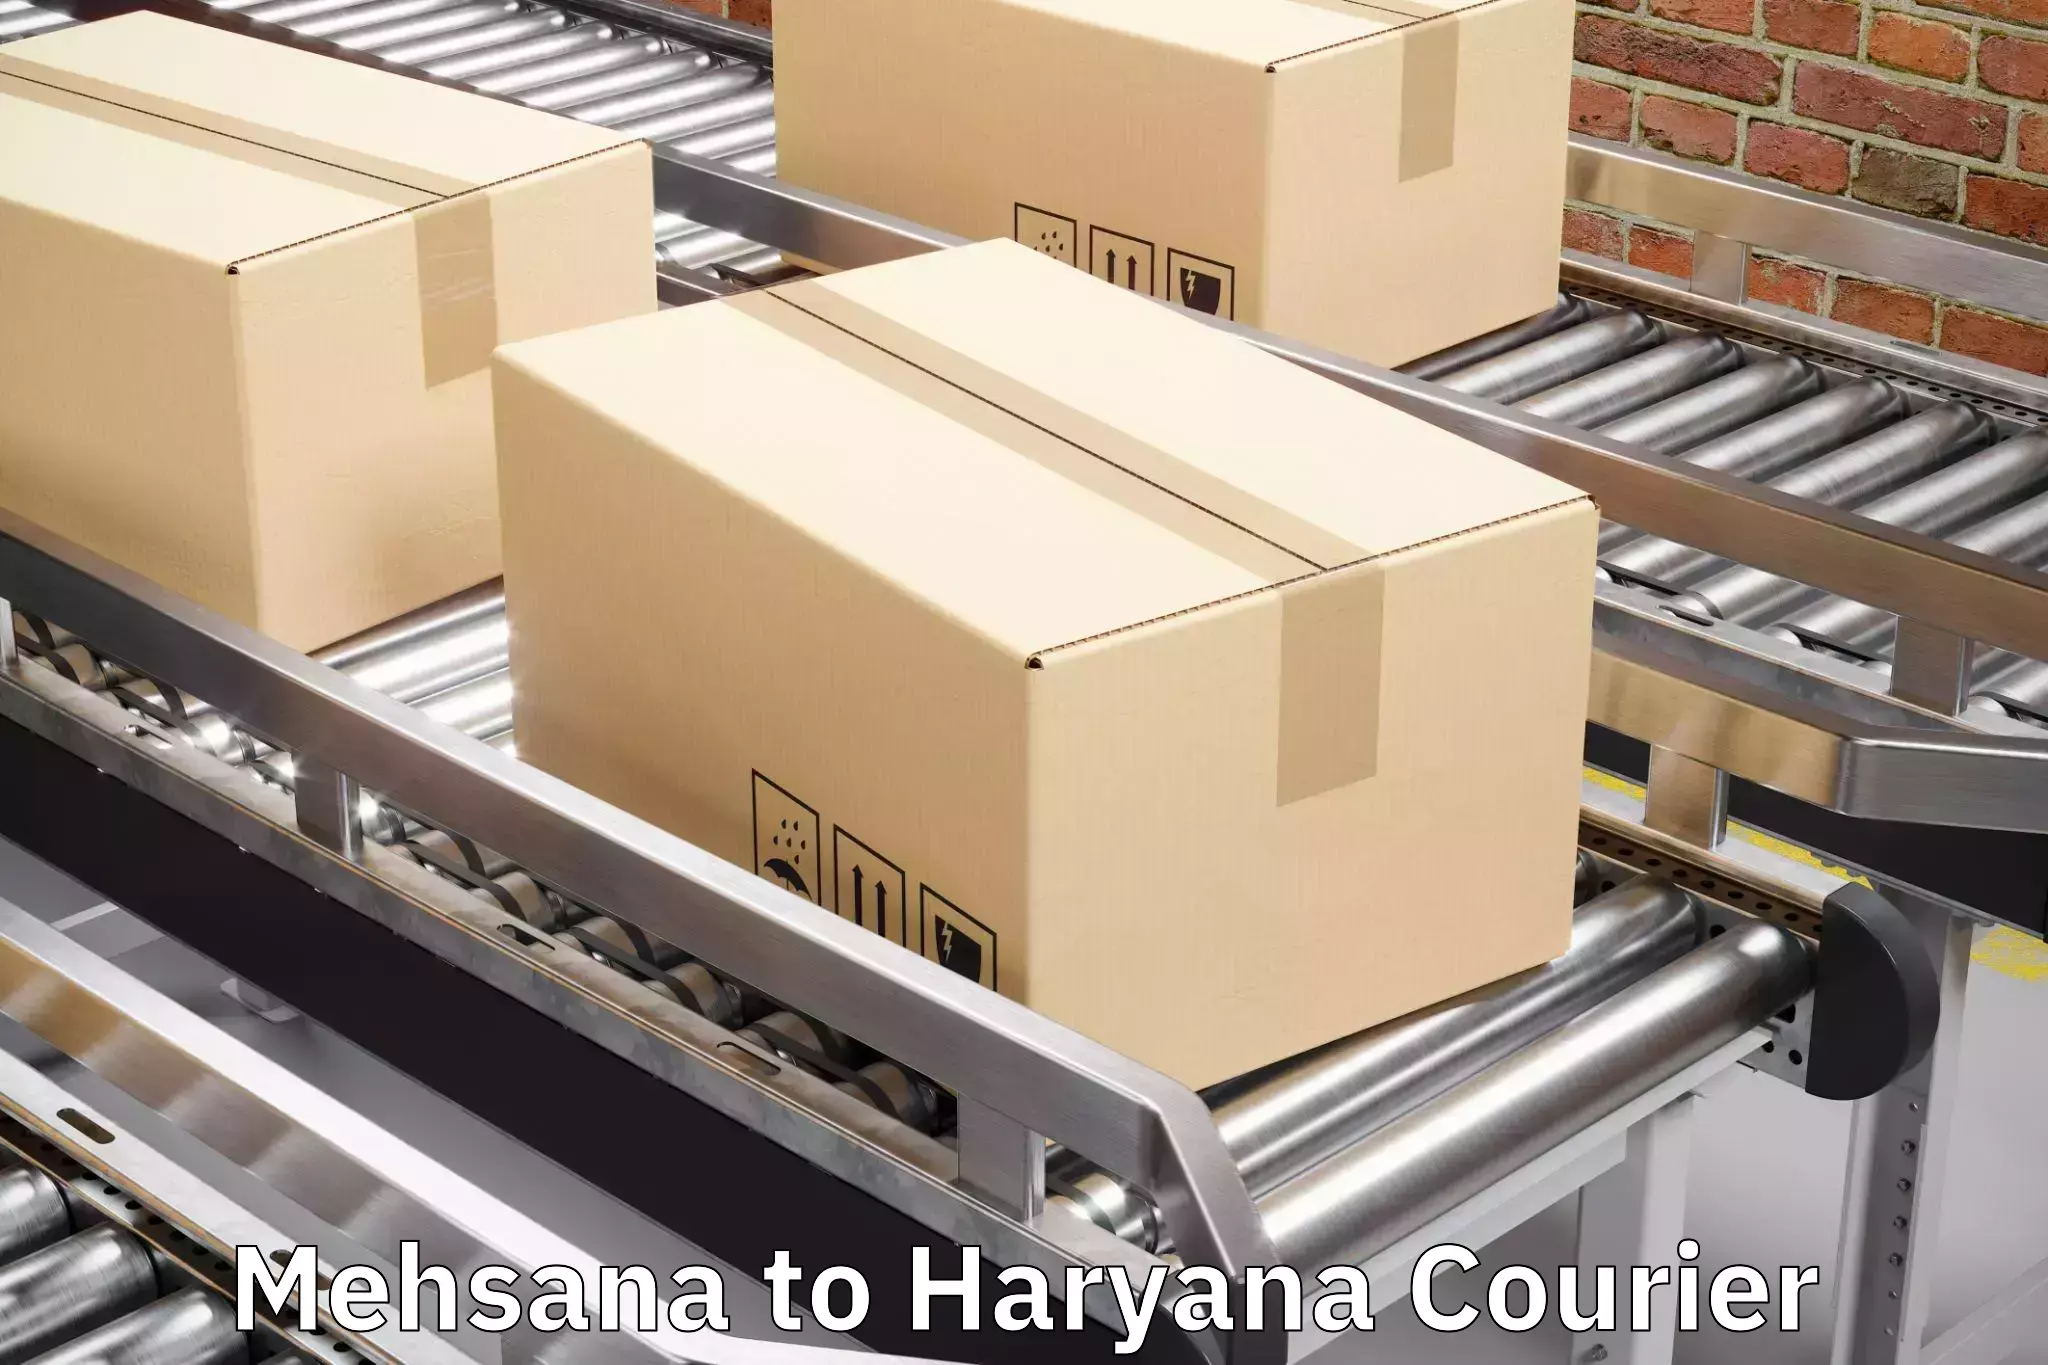 Baggage relocation service Mehsana to NCR Haryana